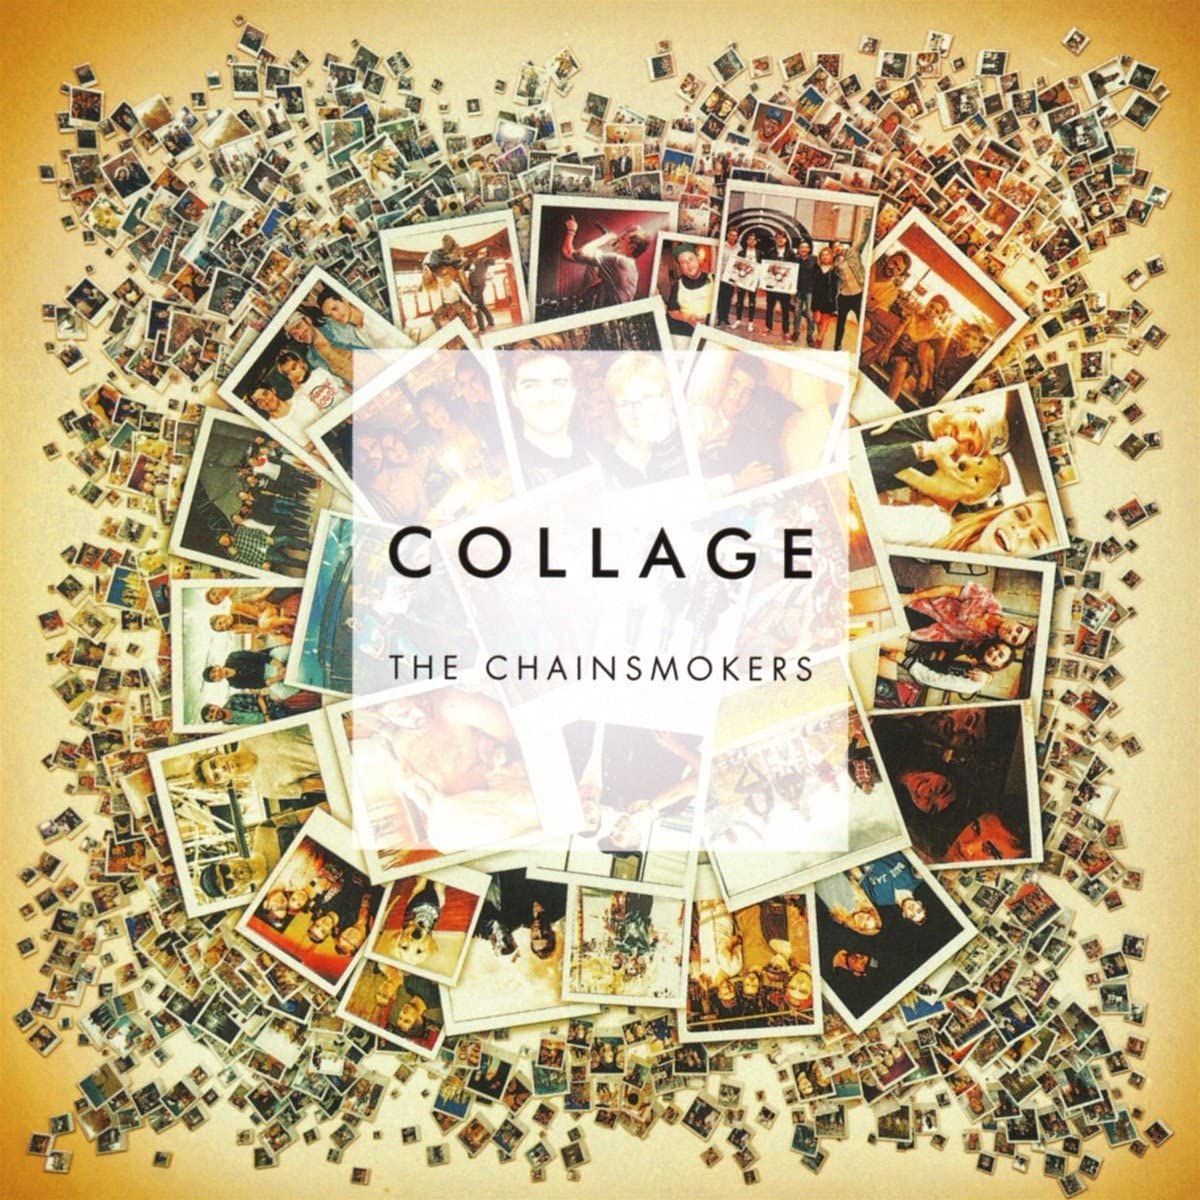 The Chainsmokersの2作目のEP「Collage」に収録